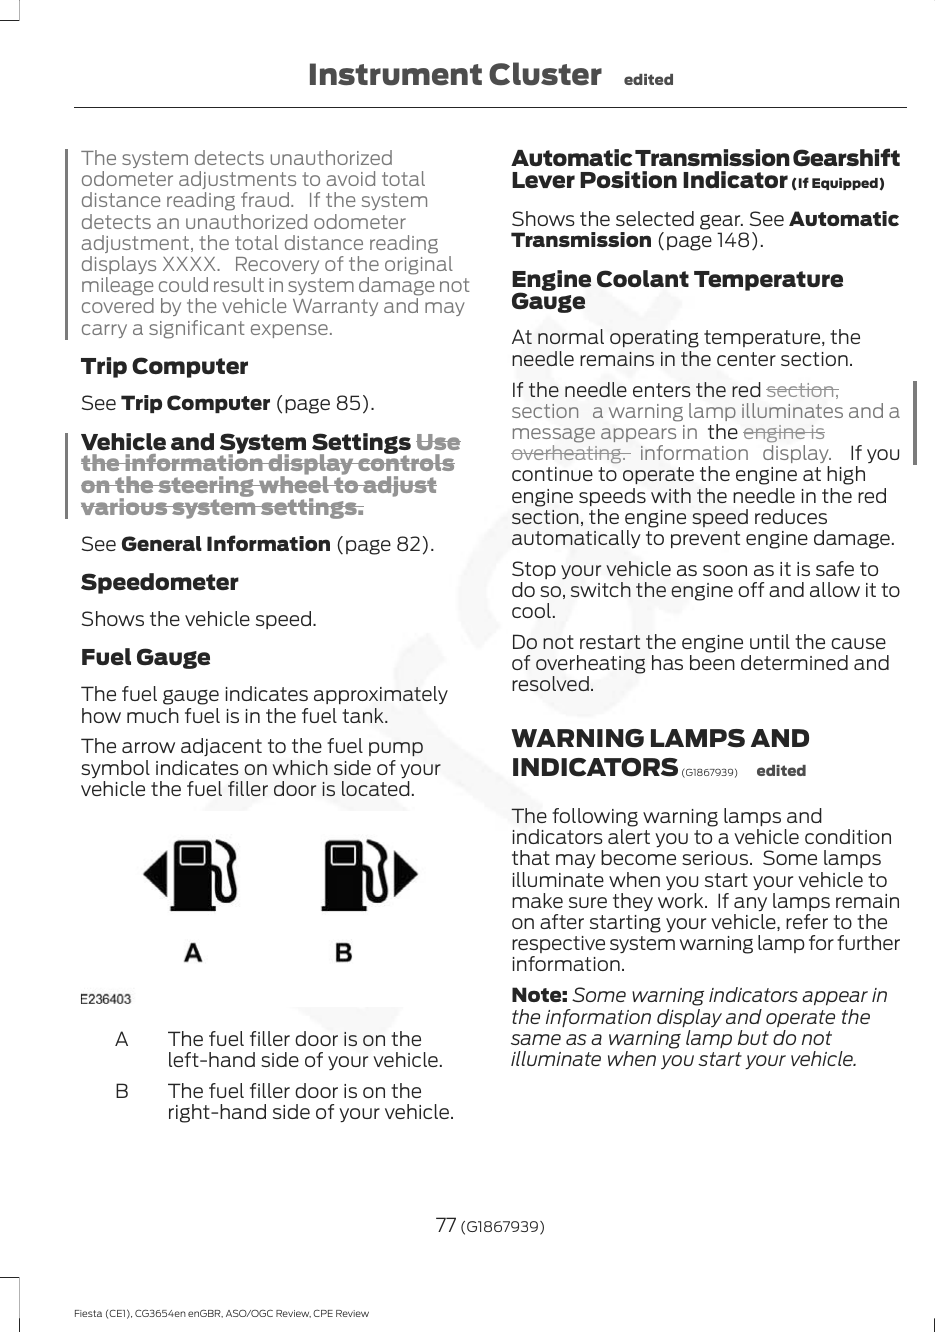 The system detects unauthorizedodometer adjustments to avoid totaldistance reading fraud. If the systemdetects an unauthorized odometeradjustment, the total distance readingdisplays XXXX. Recovery of the originalmileage could result in system damage notcovered by the vehicle Warranty and maycarry a significant expense.Trip ComputerSee Trip Computer (page 85).Vehicle and System Settings Usethe information display controlson the steering wheel to adjustvarious system settings.See General Information (page 82).SpeedometerShows the vehicle speed.Fuel GaugeThe fuel gauge indicates approximatelyhow much fuel is in the fuel tank.The arrow adjacent to the fuel pumpsymbol indicates on which side of yourvehicle the fuel filler door is located.The fuel filler door is on theleft-hand side of your vehicle.AThe fuel filler door is on theright-hand side of your vehicle.BAutomatic Transmission GearshiftLever Position Indicator (If Equipped)Shows the selected gear. See AutomaticTransmission (page 148).Engine Coolant TemperatureGaugeAt normal operating temperature, theneedle remains in the center section.If the needle enters the red section,section  a warning lamp illuminates and amessage appears in  the engine isoverheating. information display.   If youcontinue to operate the engine at highengine speeds with the needle in the redsection, the engine speed reducesautomatically to prevent engine damage.Stop your vehicle as soon as it is safe todo so, switch the engine off and allow it tocool.Do not restart the engine until the causeof overheating has been determined andresolved.WARNING LAMPS ANDINDICATORS (G1867939) editedThe following warning lamps andindicators alert you to a vehicle conditionthat may become serious.  Some lampsilluminate when you start your vehicle tomake sure they work.  If any lamps remainon after starting your vehicle, refer to therespective system warning lamp for furtherinformation.Note: Some warning indicators appear inthe information display and operate thesame as a warning lamp but do notilluminate when you start your vehicle.77 (G1867939)Fiesta (CE1), CG3654en enGBR, ASO/OGC Review, CPE ReviewInstrument Cluster edited